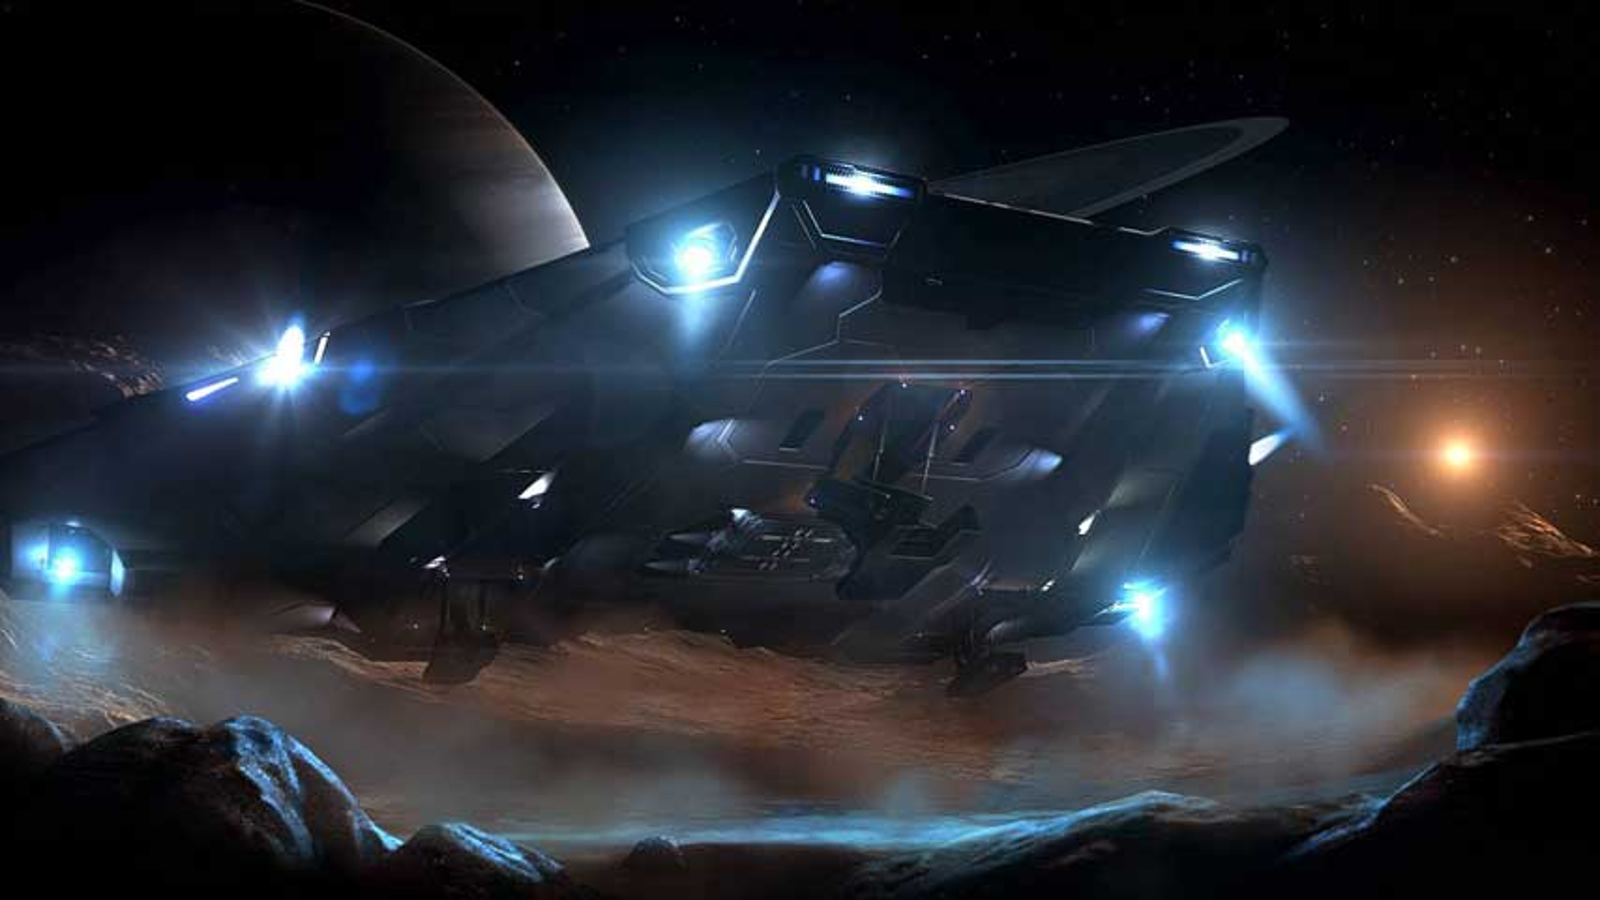 Elite Dangerous: Horizons is now available for Xbox One